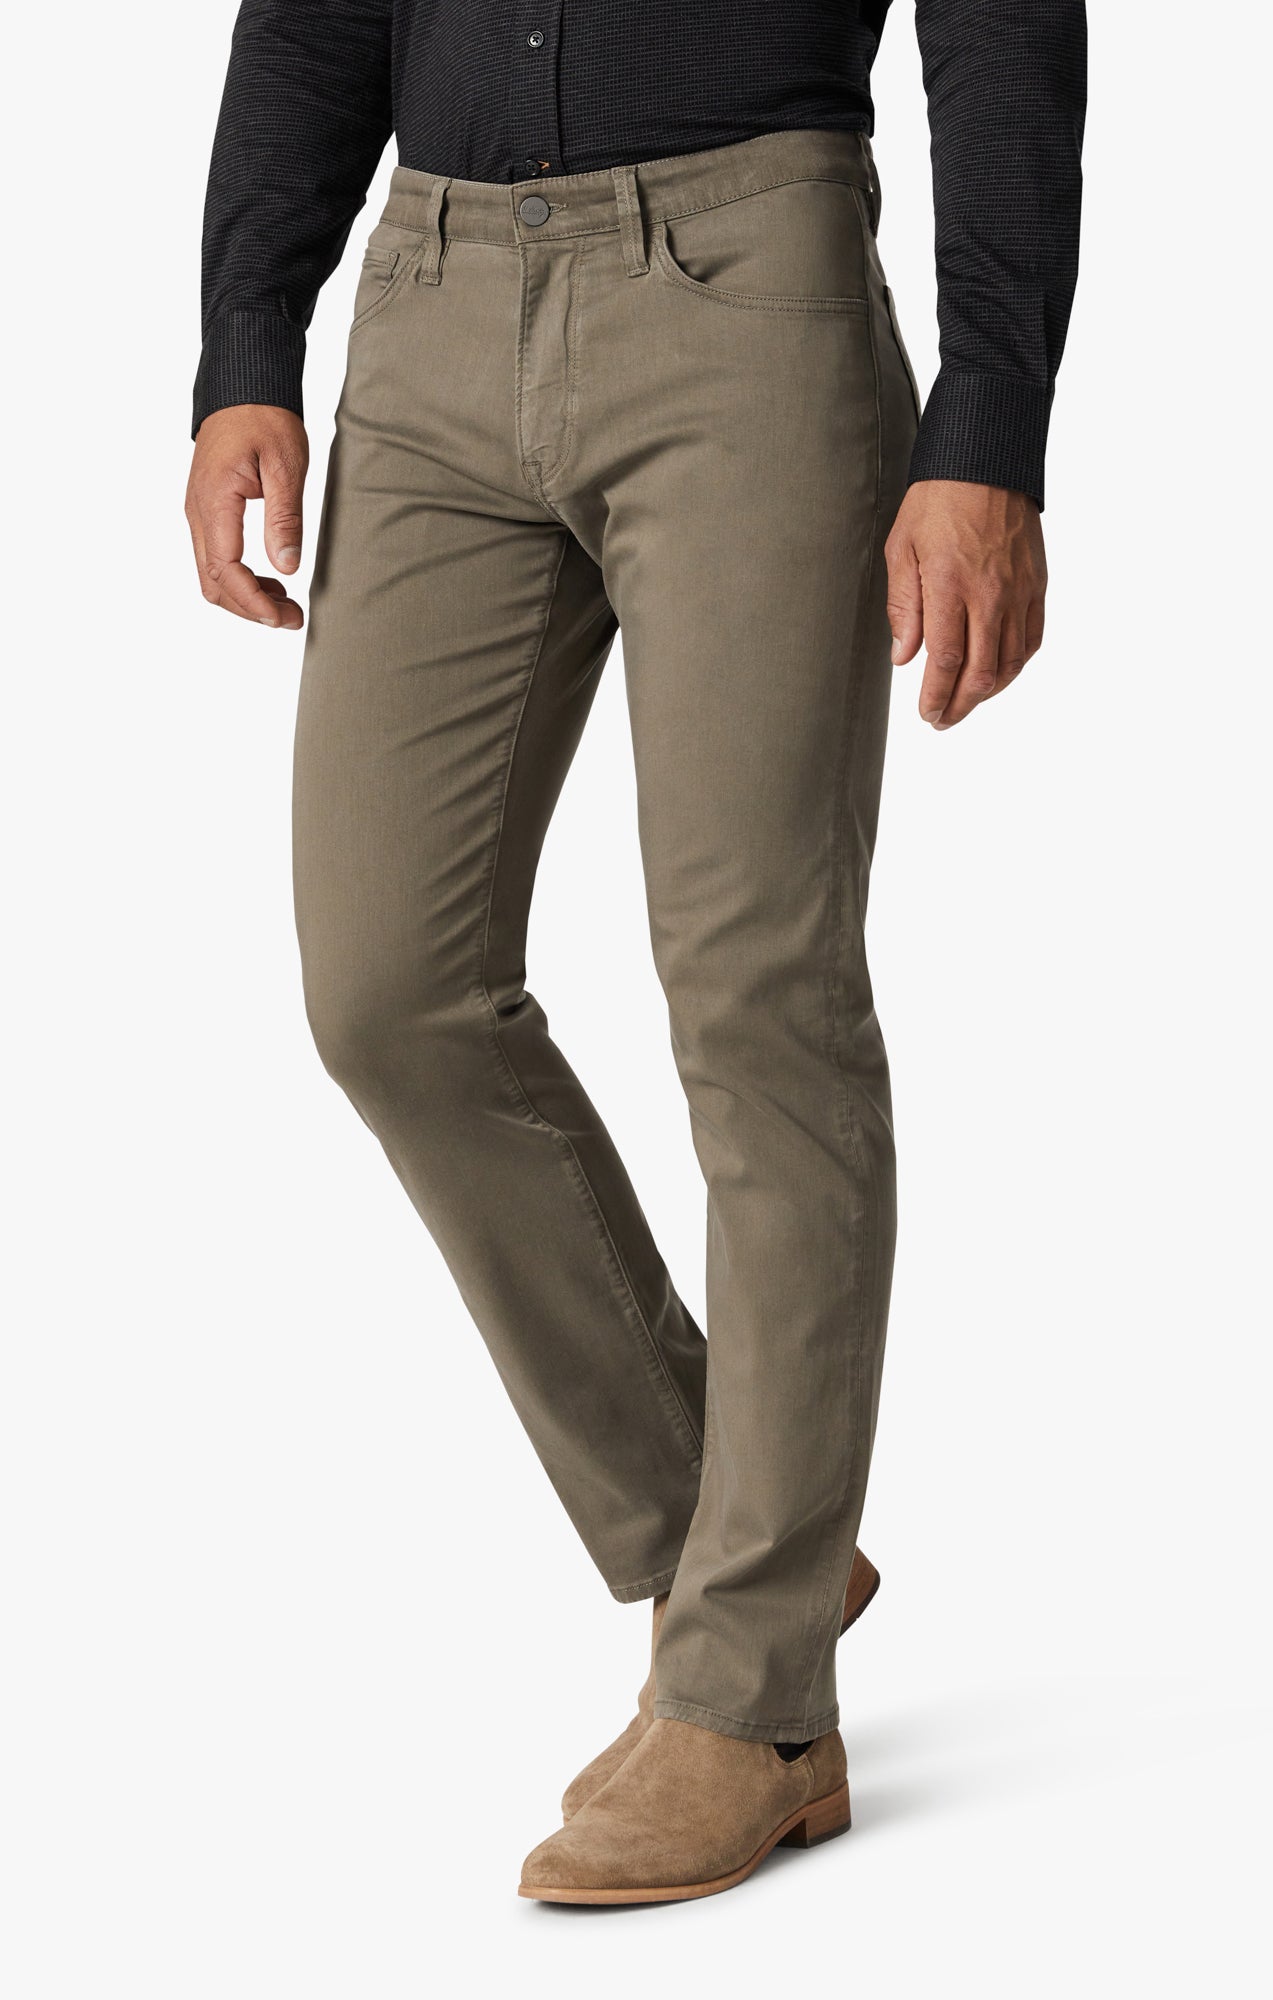 Courage Straight Leg Pants in Canteen Twill Image 3